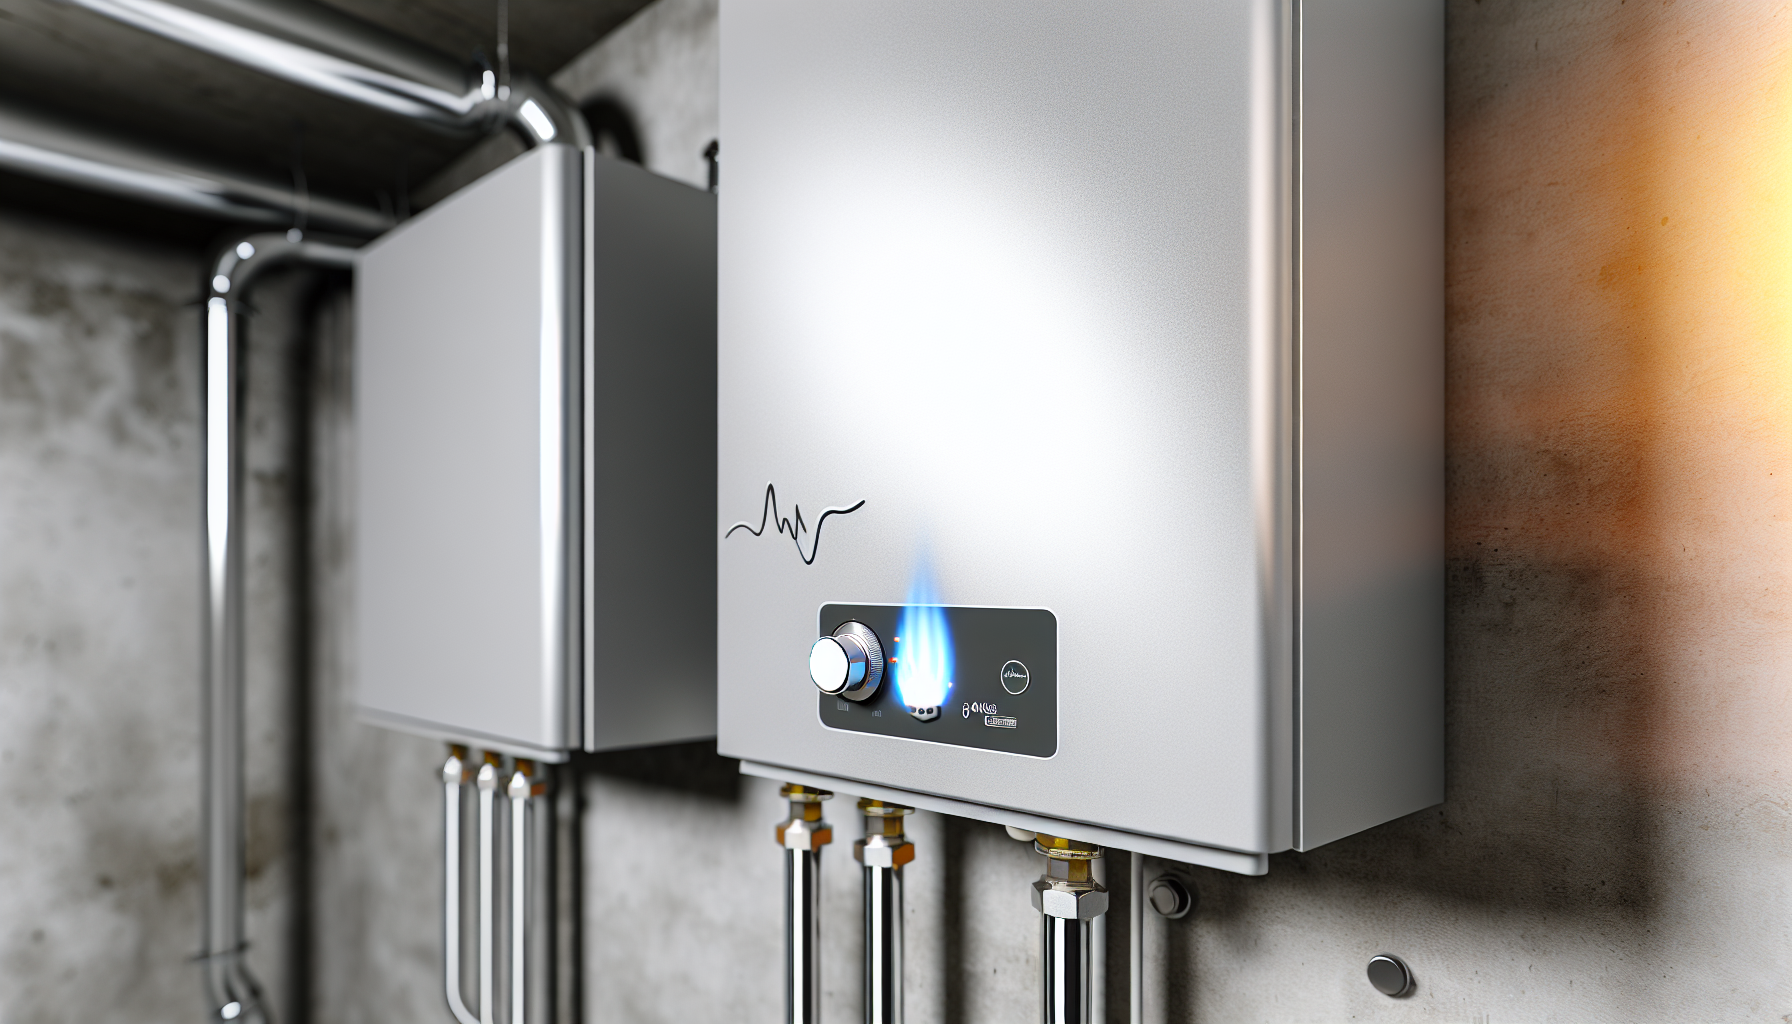 Highly efficient gas hot water systems with low emissions